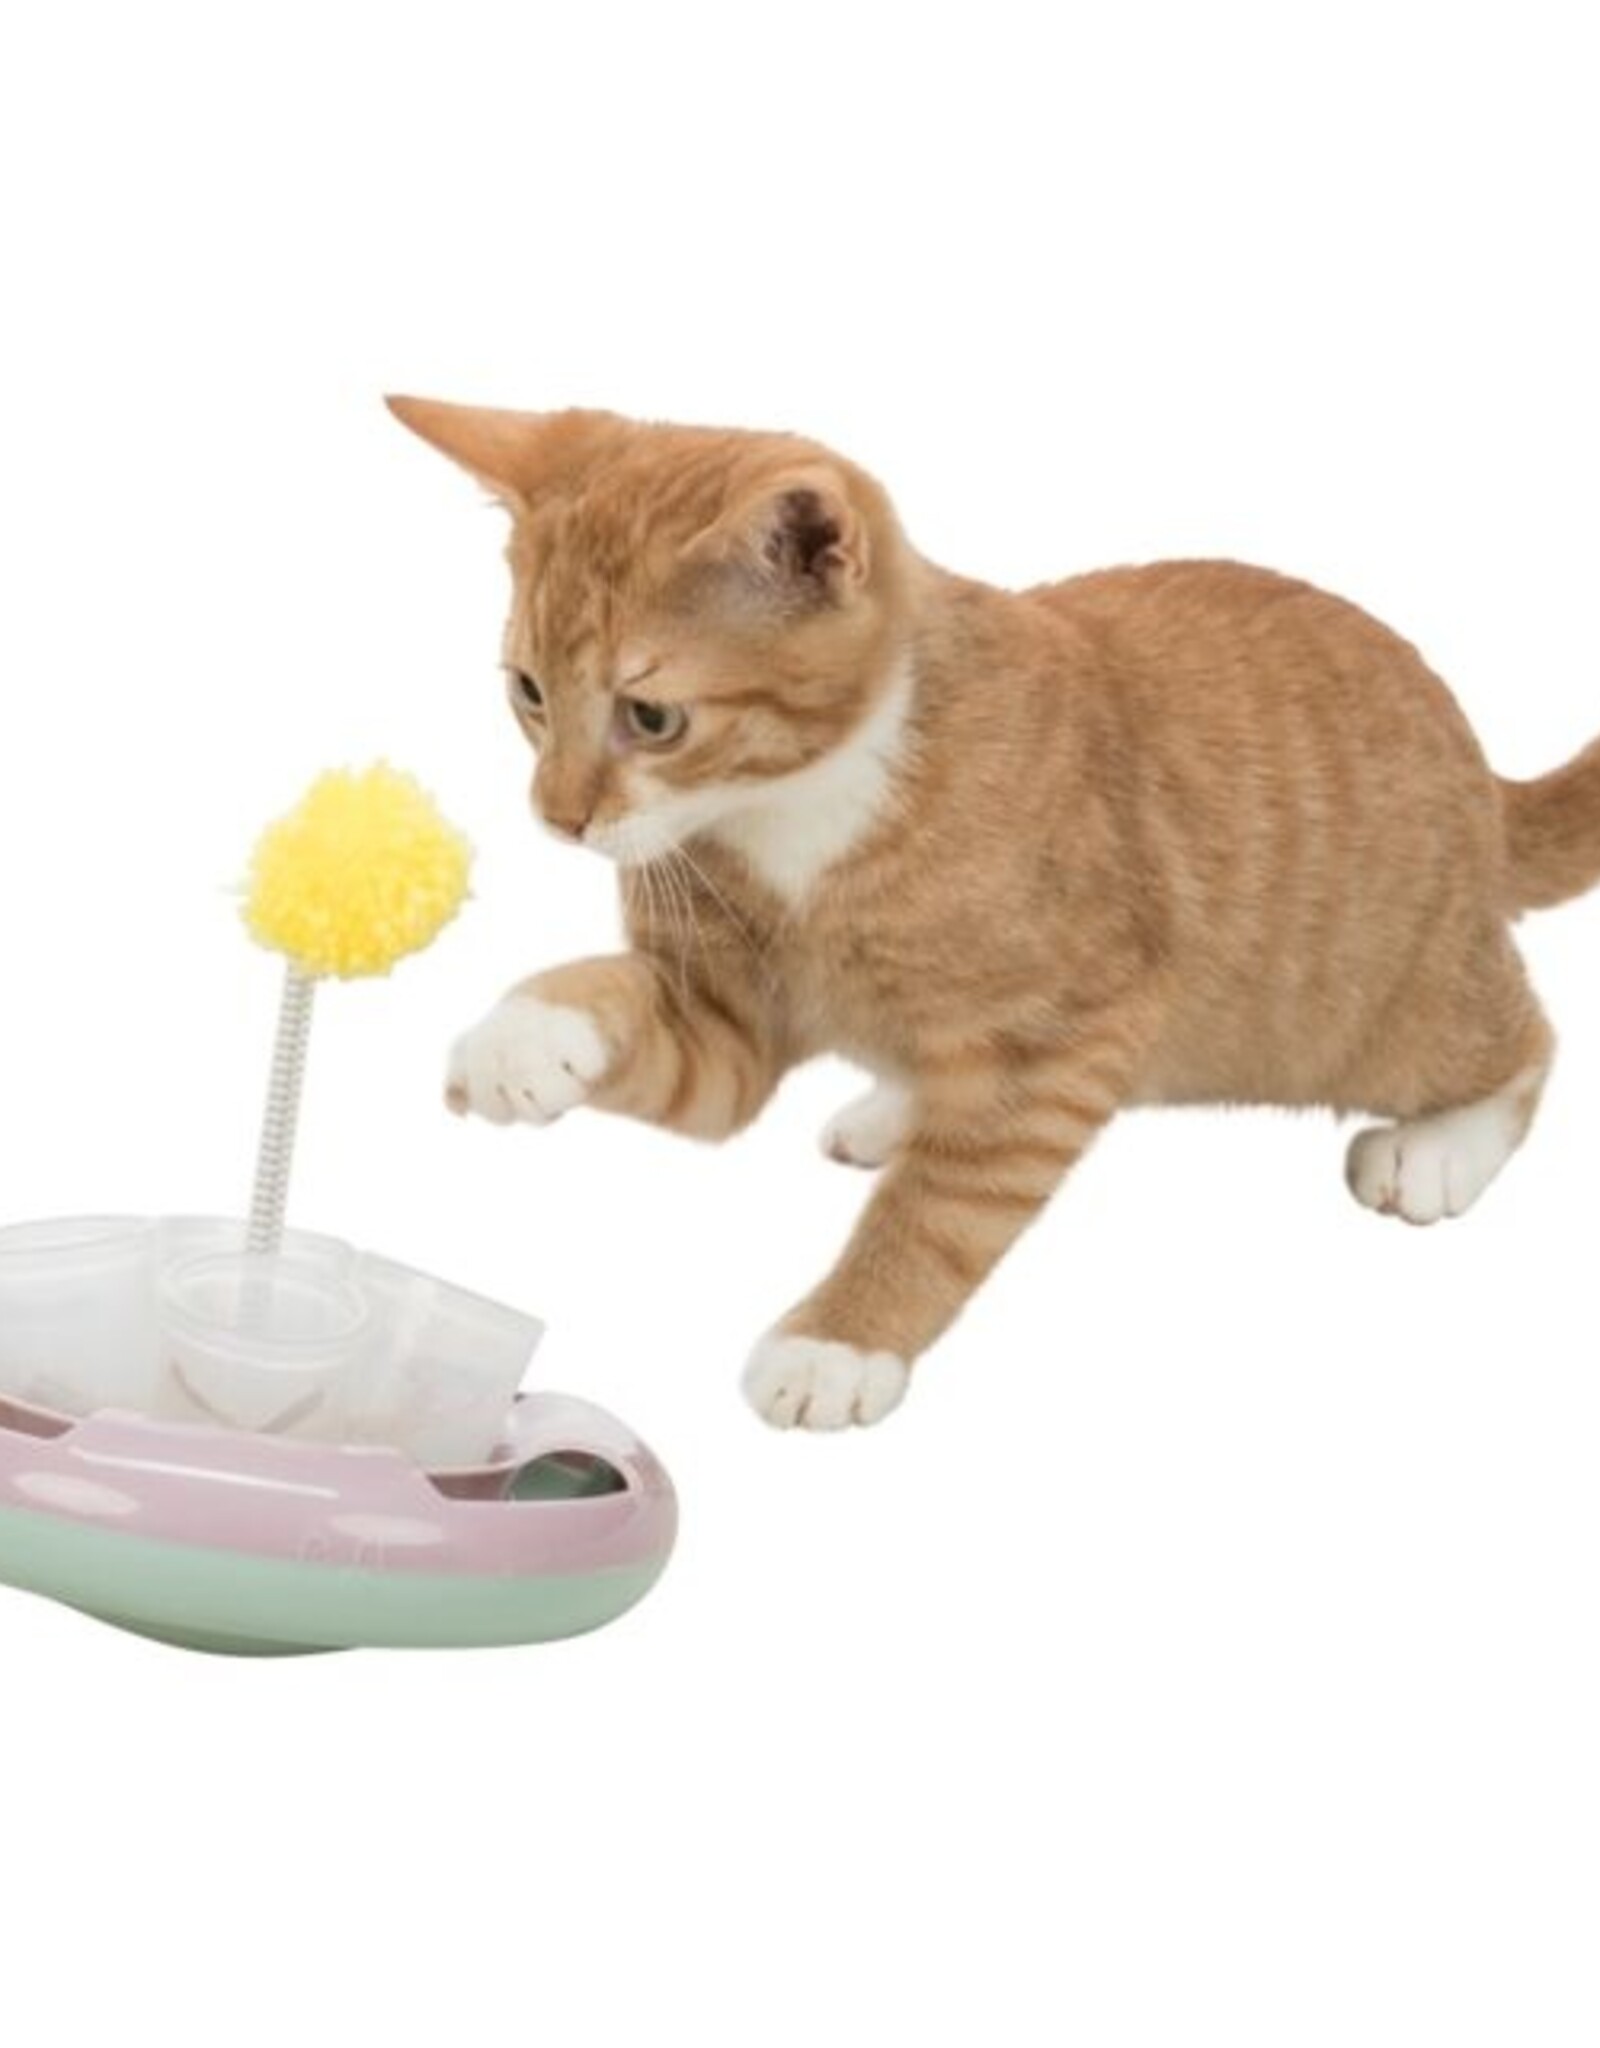 Trixie Trixie Cat Activity Kitten Snack & Play